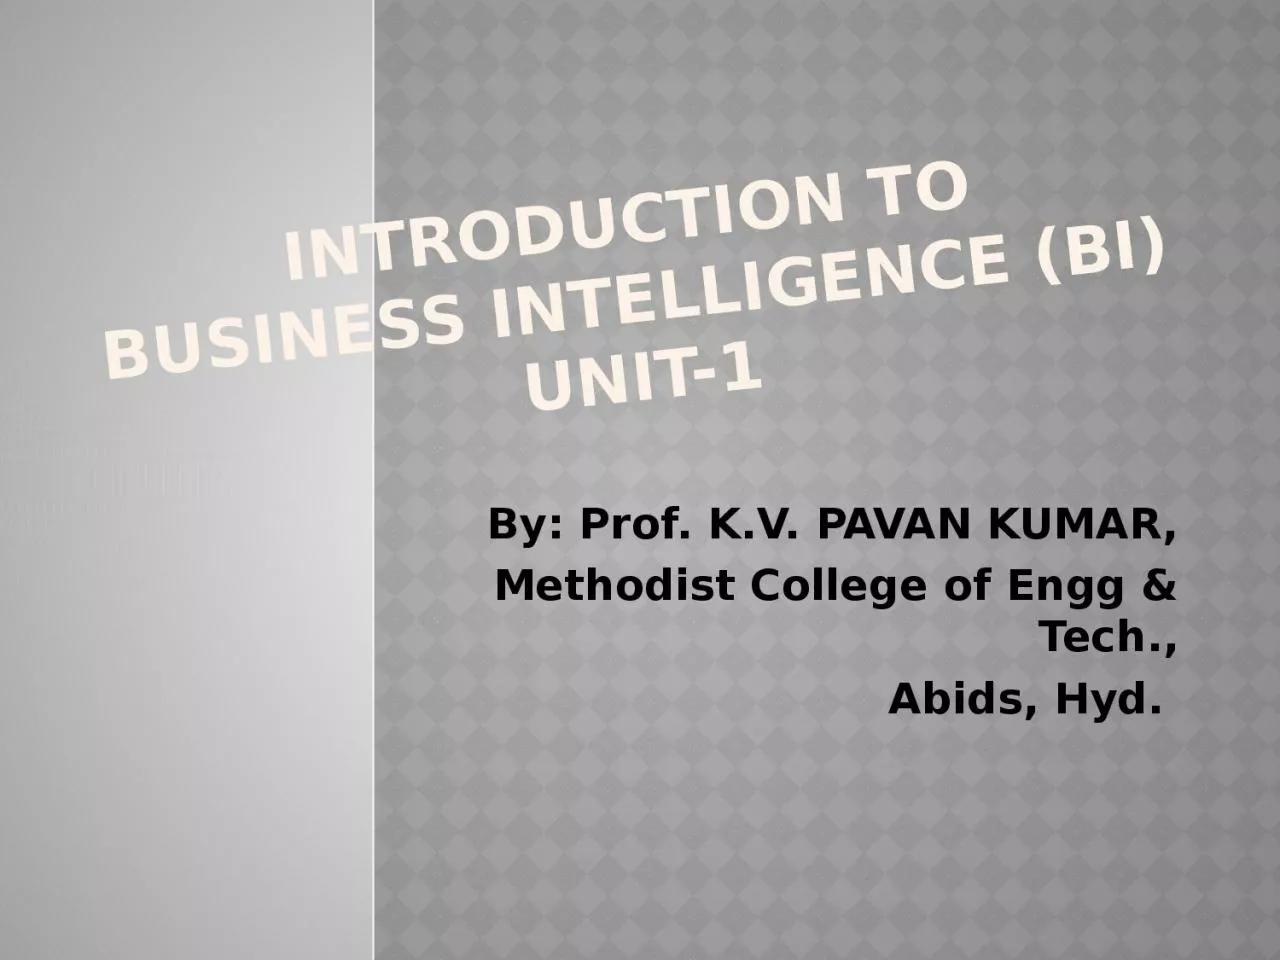 Introduction to Business Intelligence (BI)